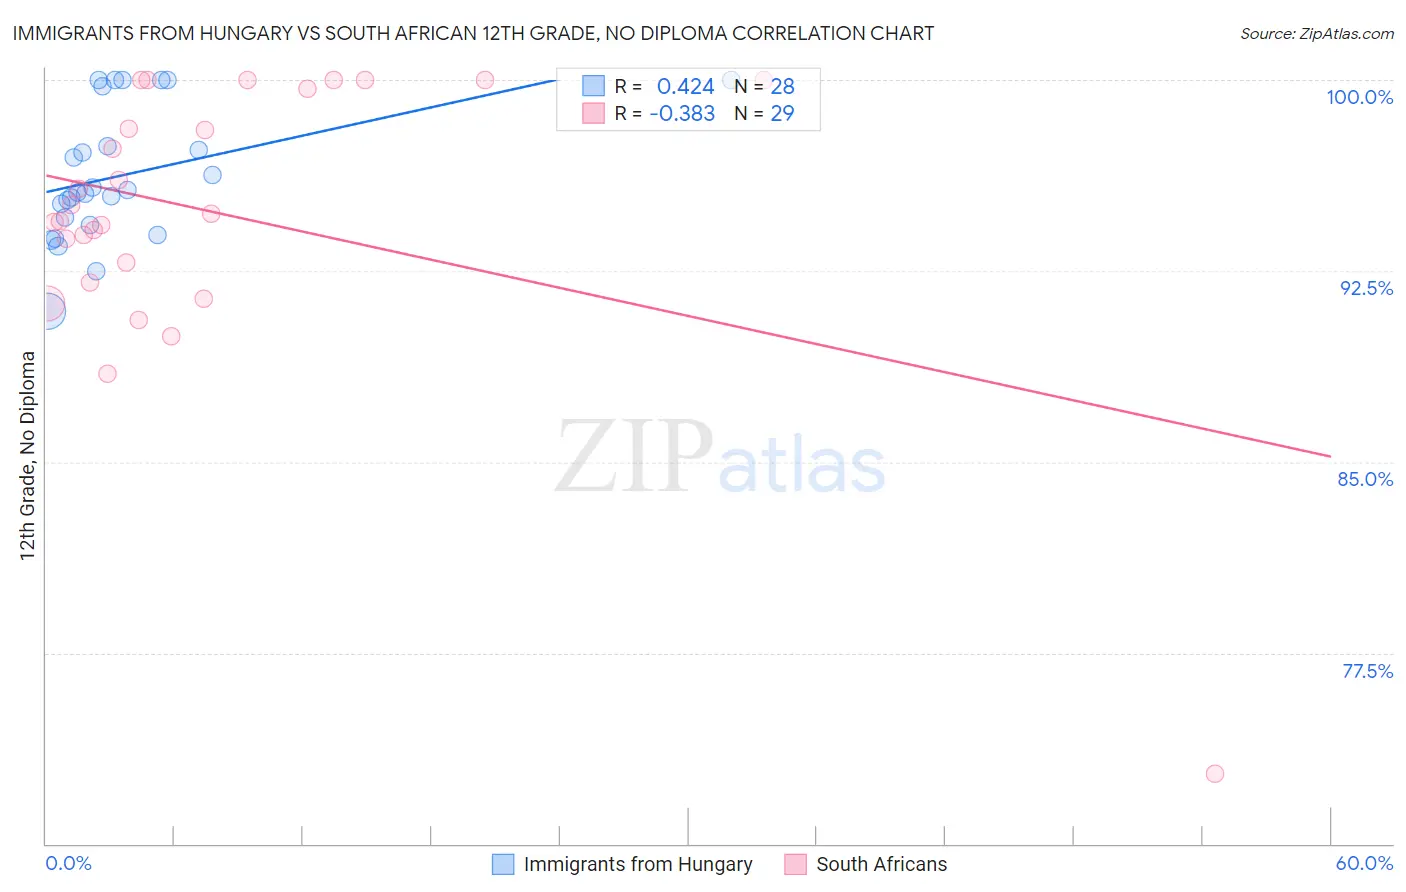 Immigrants from Hungary vs South African 12th Grade, No Diploma